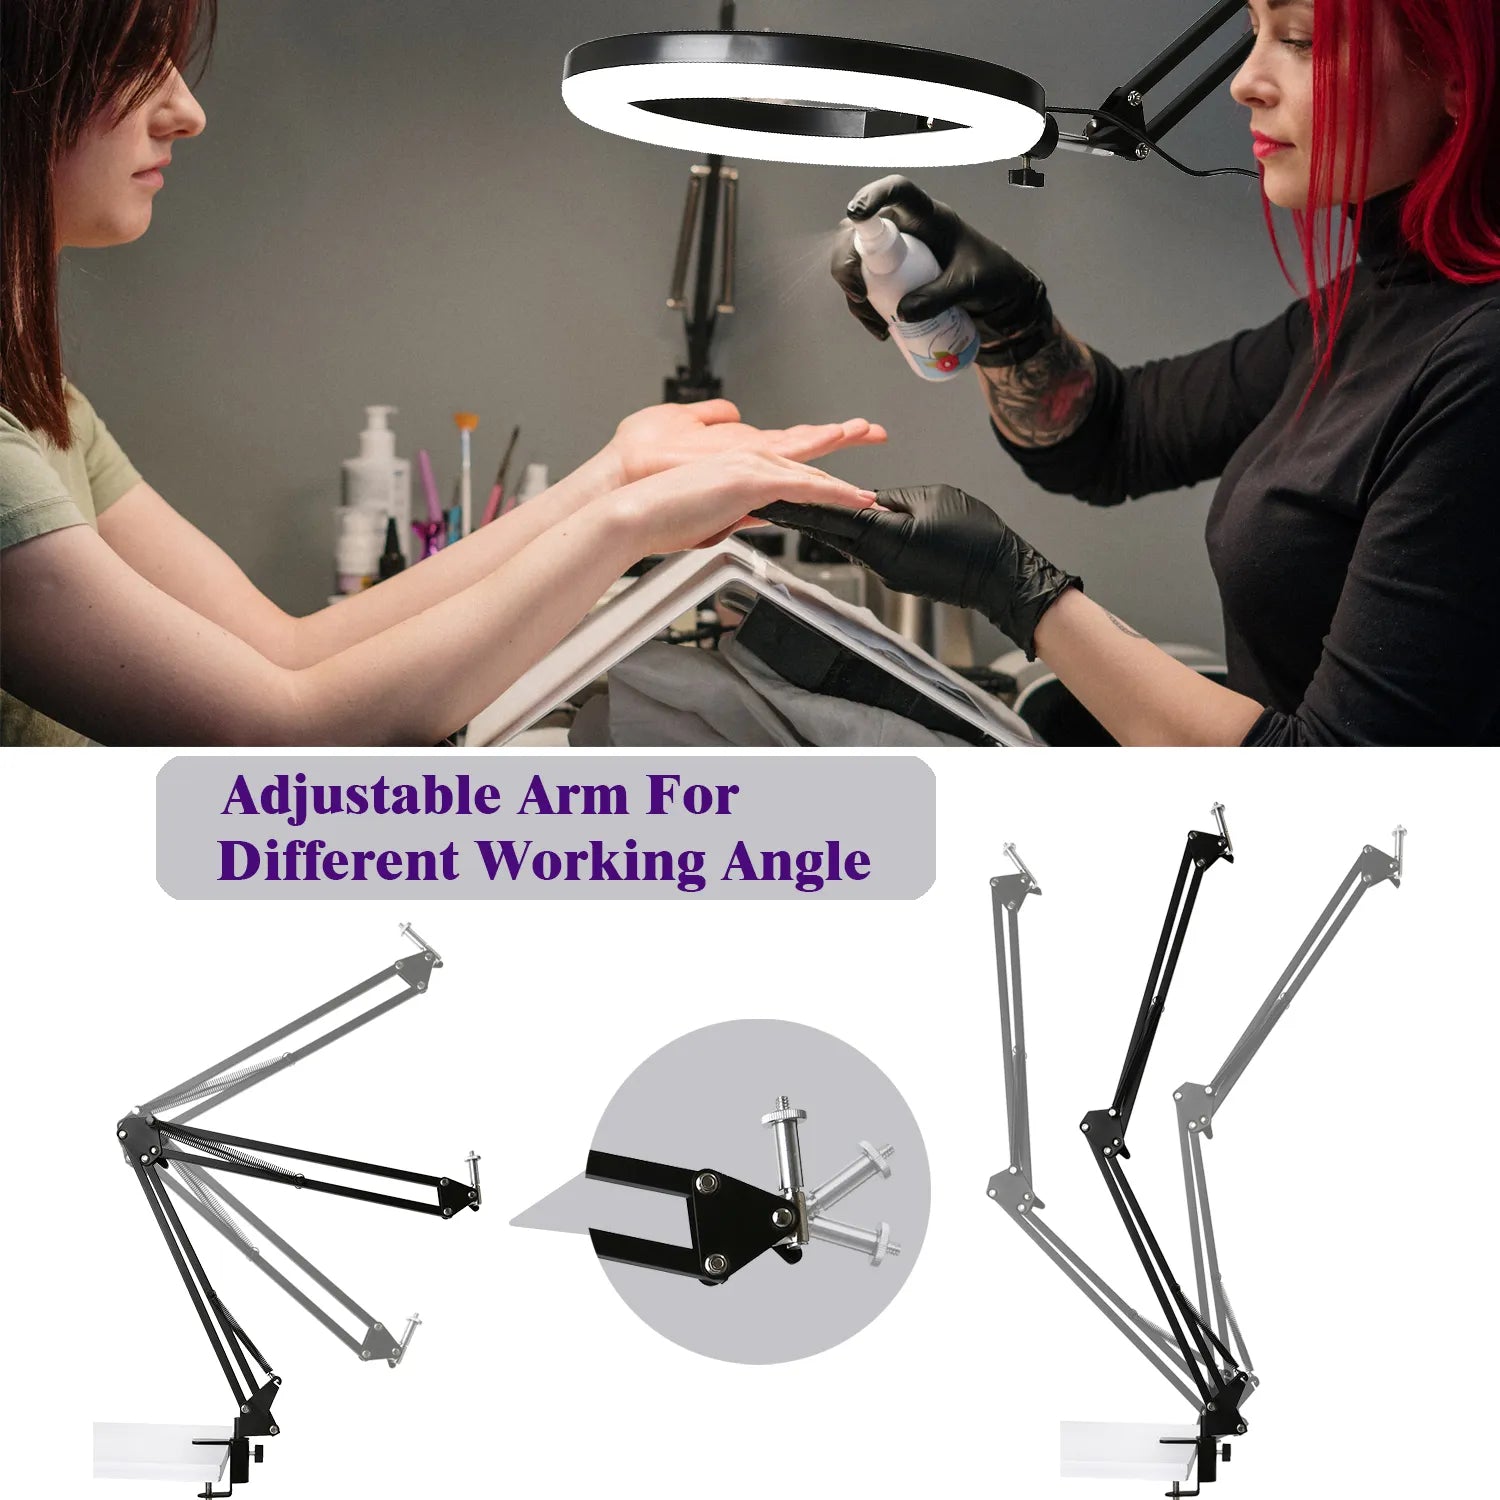 Camera Phone Tripod Table Stand Set Overhead Shot Photography Adjustable Arm Stand For Phone Camera Ring Light Lamp